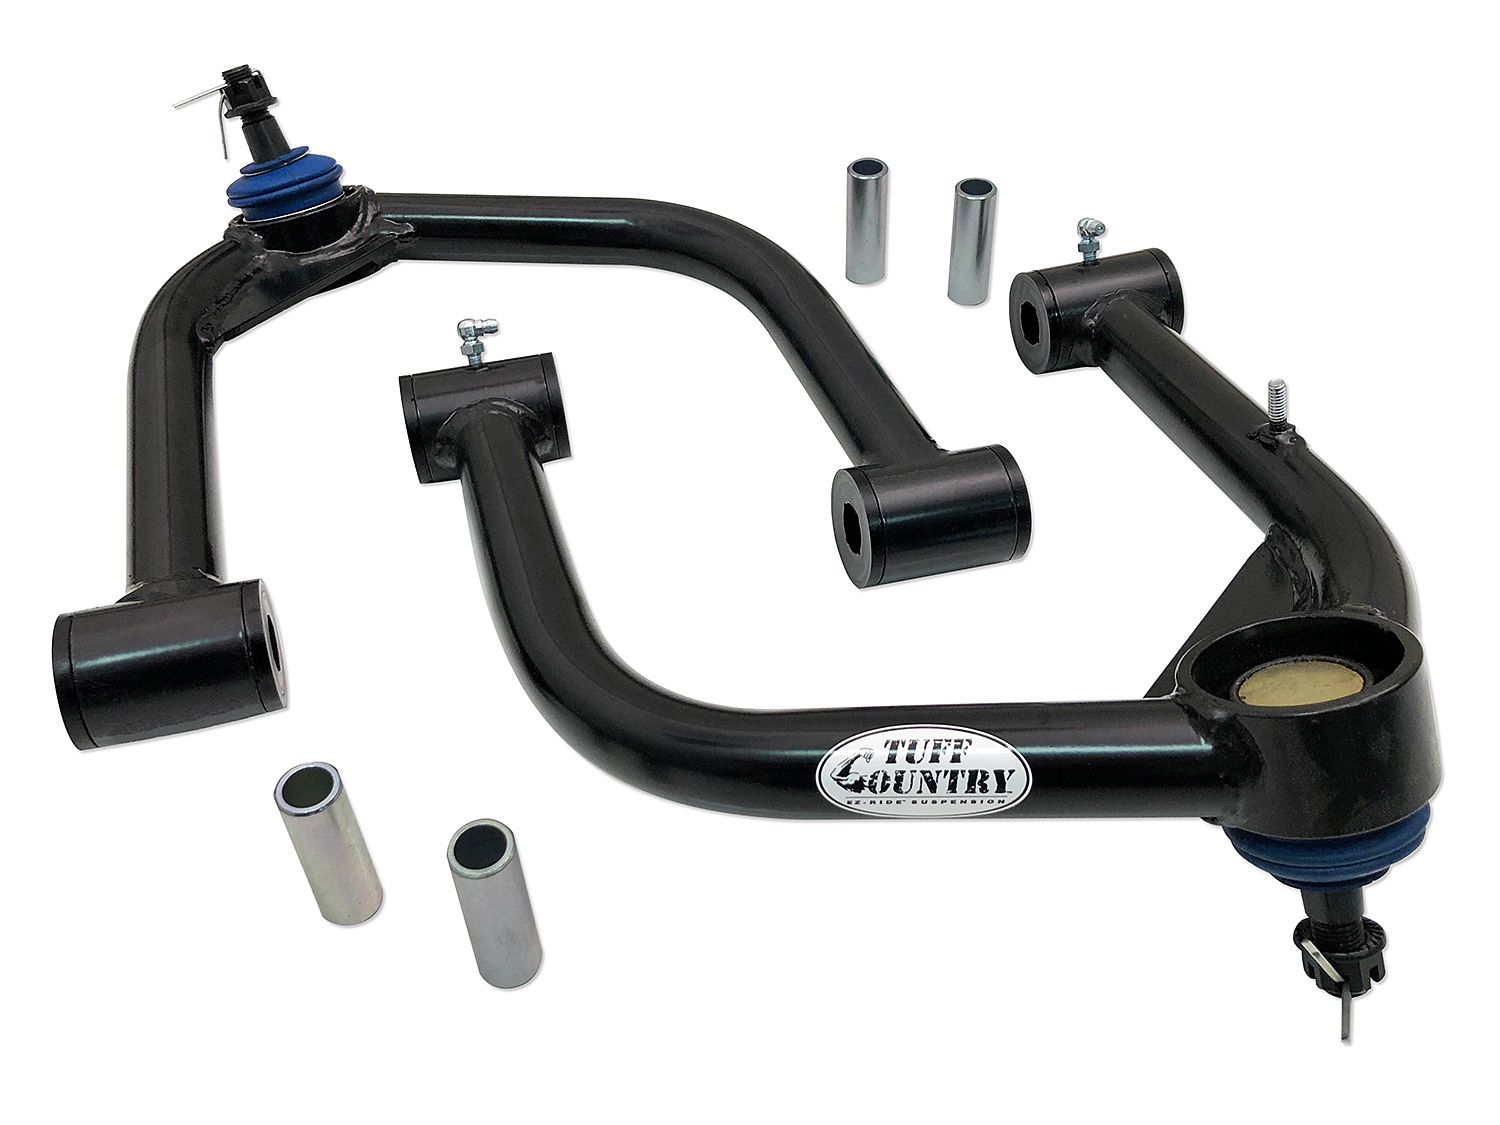 Tuff Country 50936 Upper Control Arms 4x4 & 2wd for Toyota Tundra